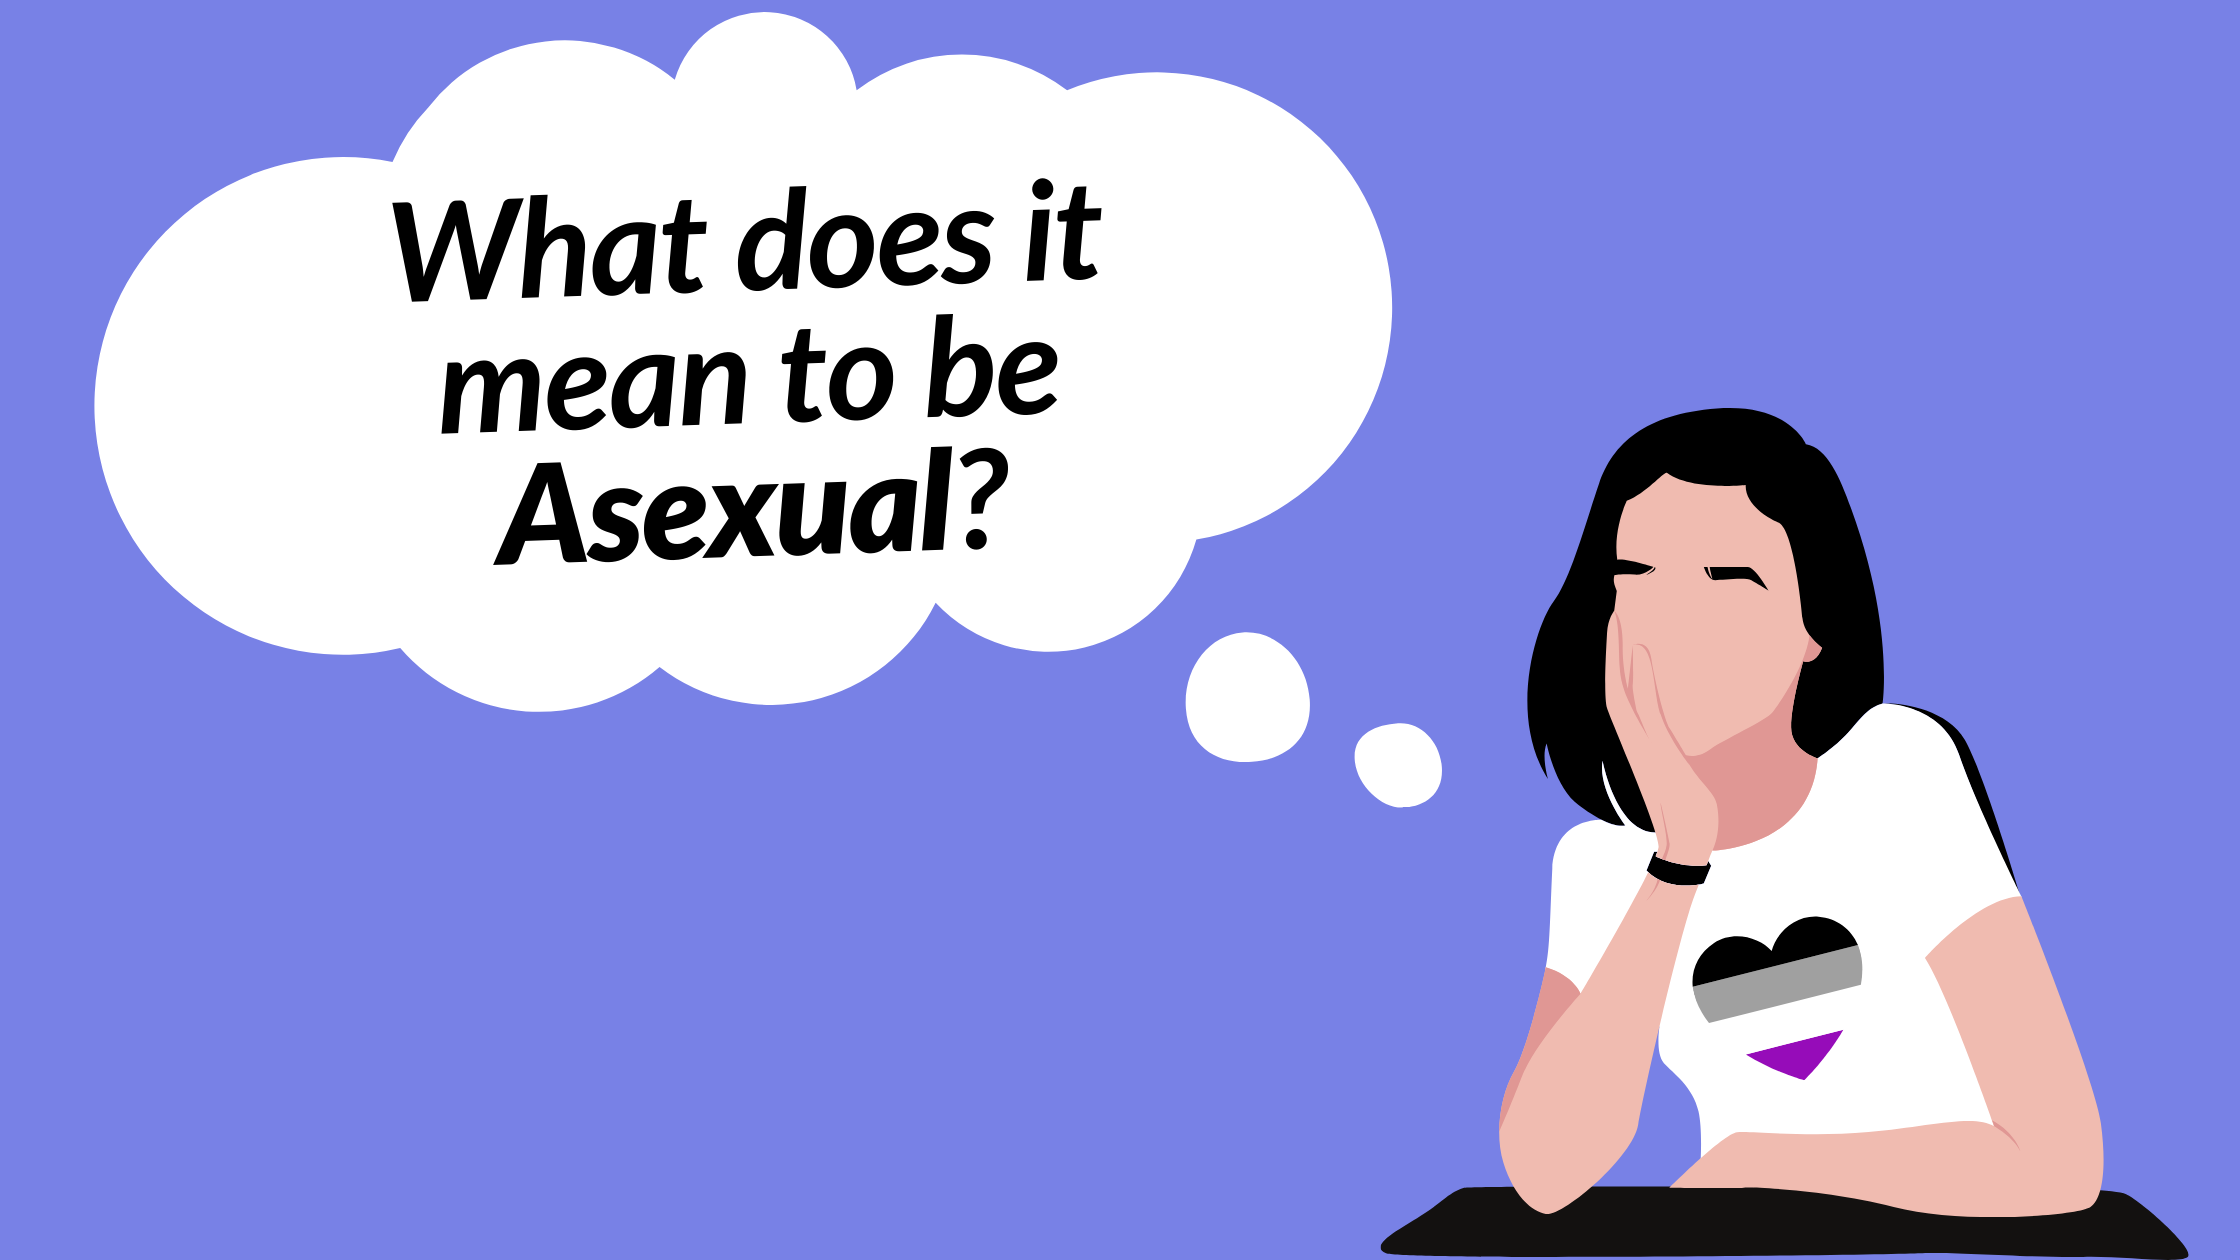 What Does it Mean to Be Asexual?